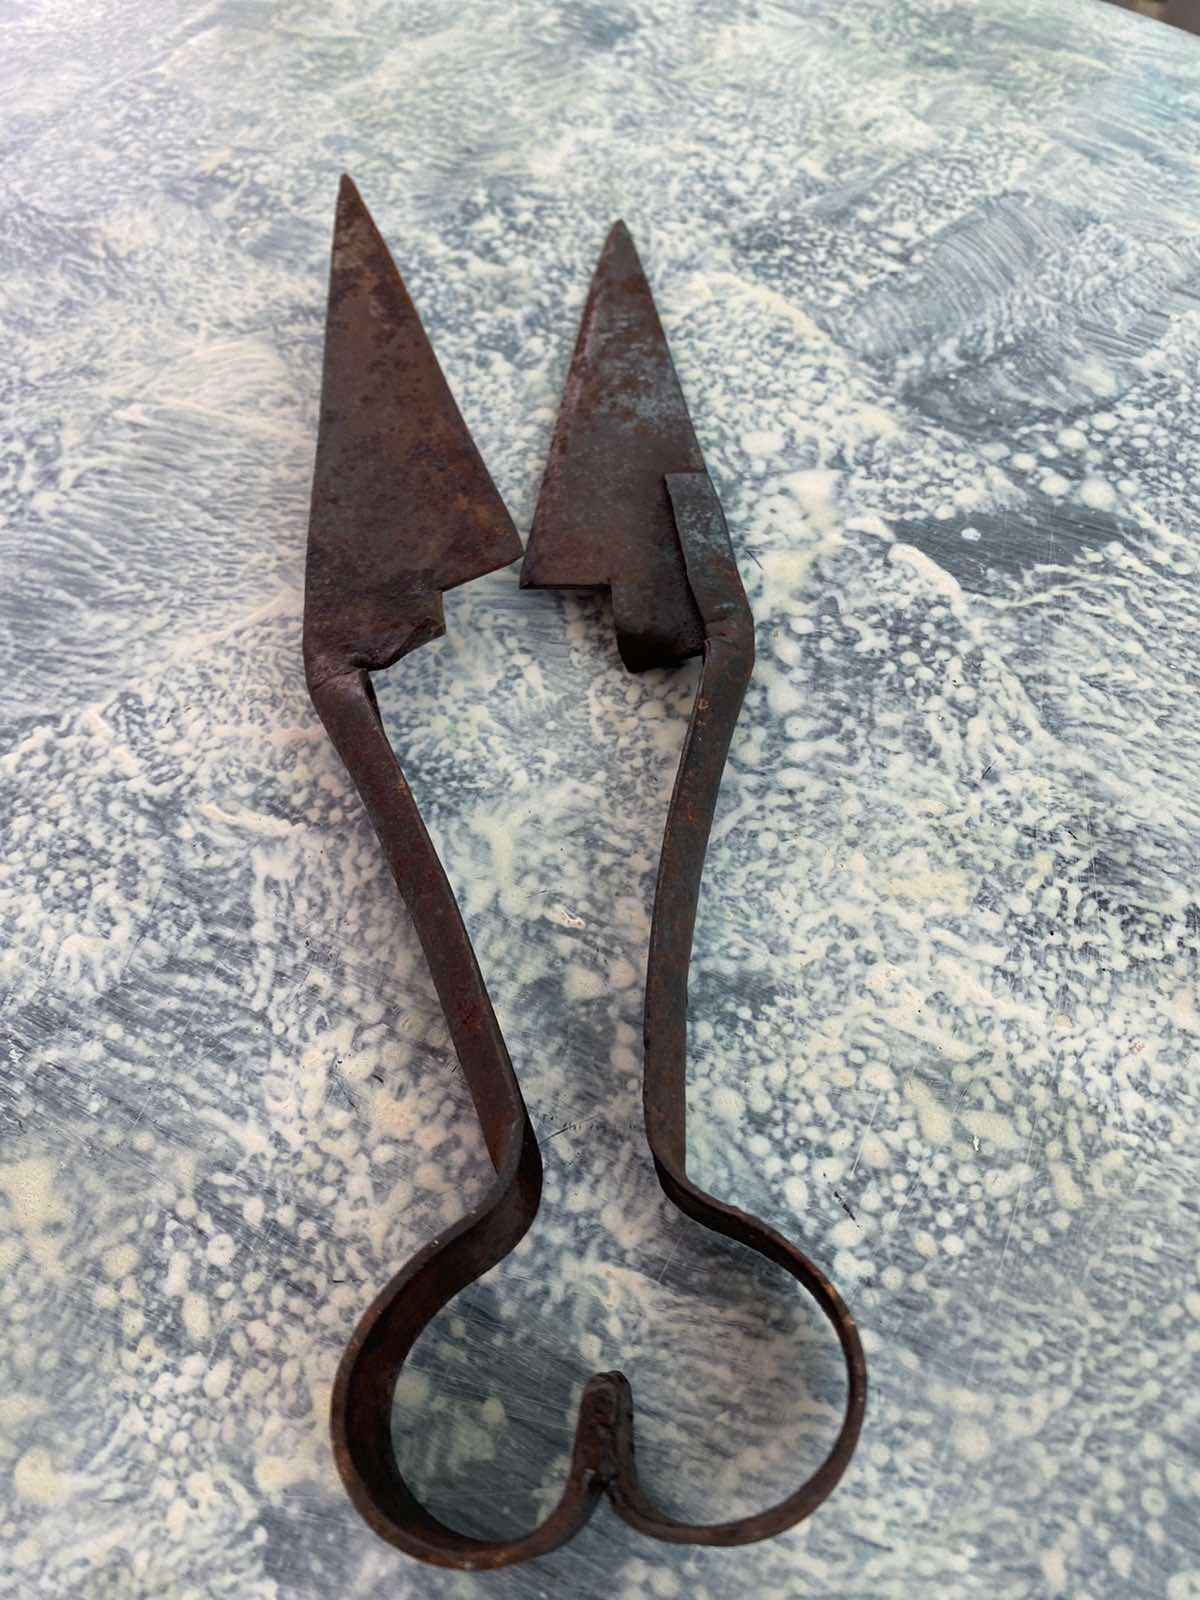 Rusty Old Fashioned Sheep Shears Held In Hand Stock Photo